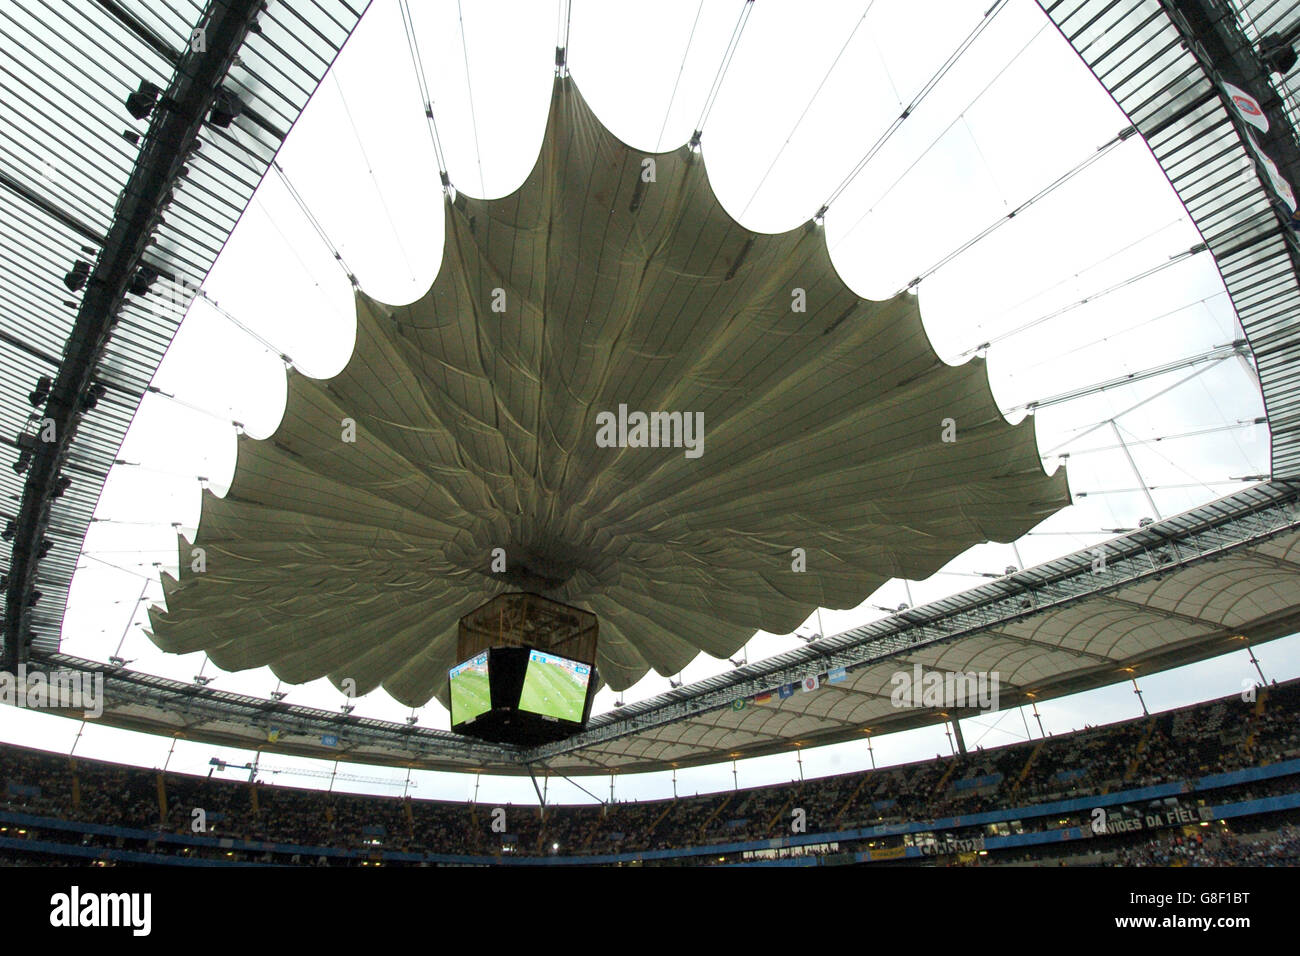 Soccer - FIFA Confederations Cup 2005 - Final - Brazil v Argentina - Commerzbank-Arena. General view of the Commerzbank-Arena Stock Photo